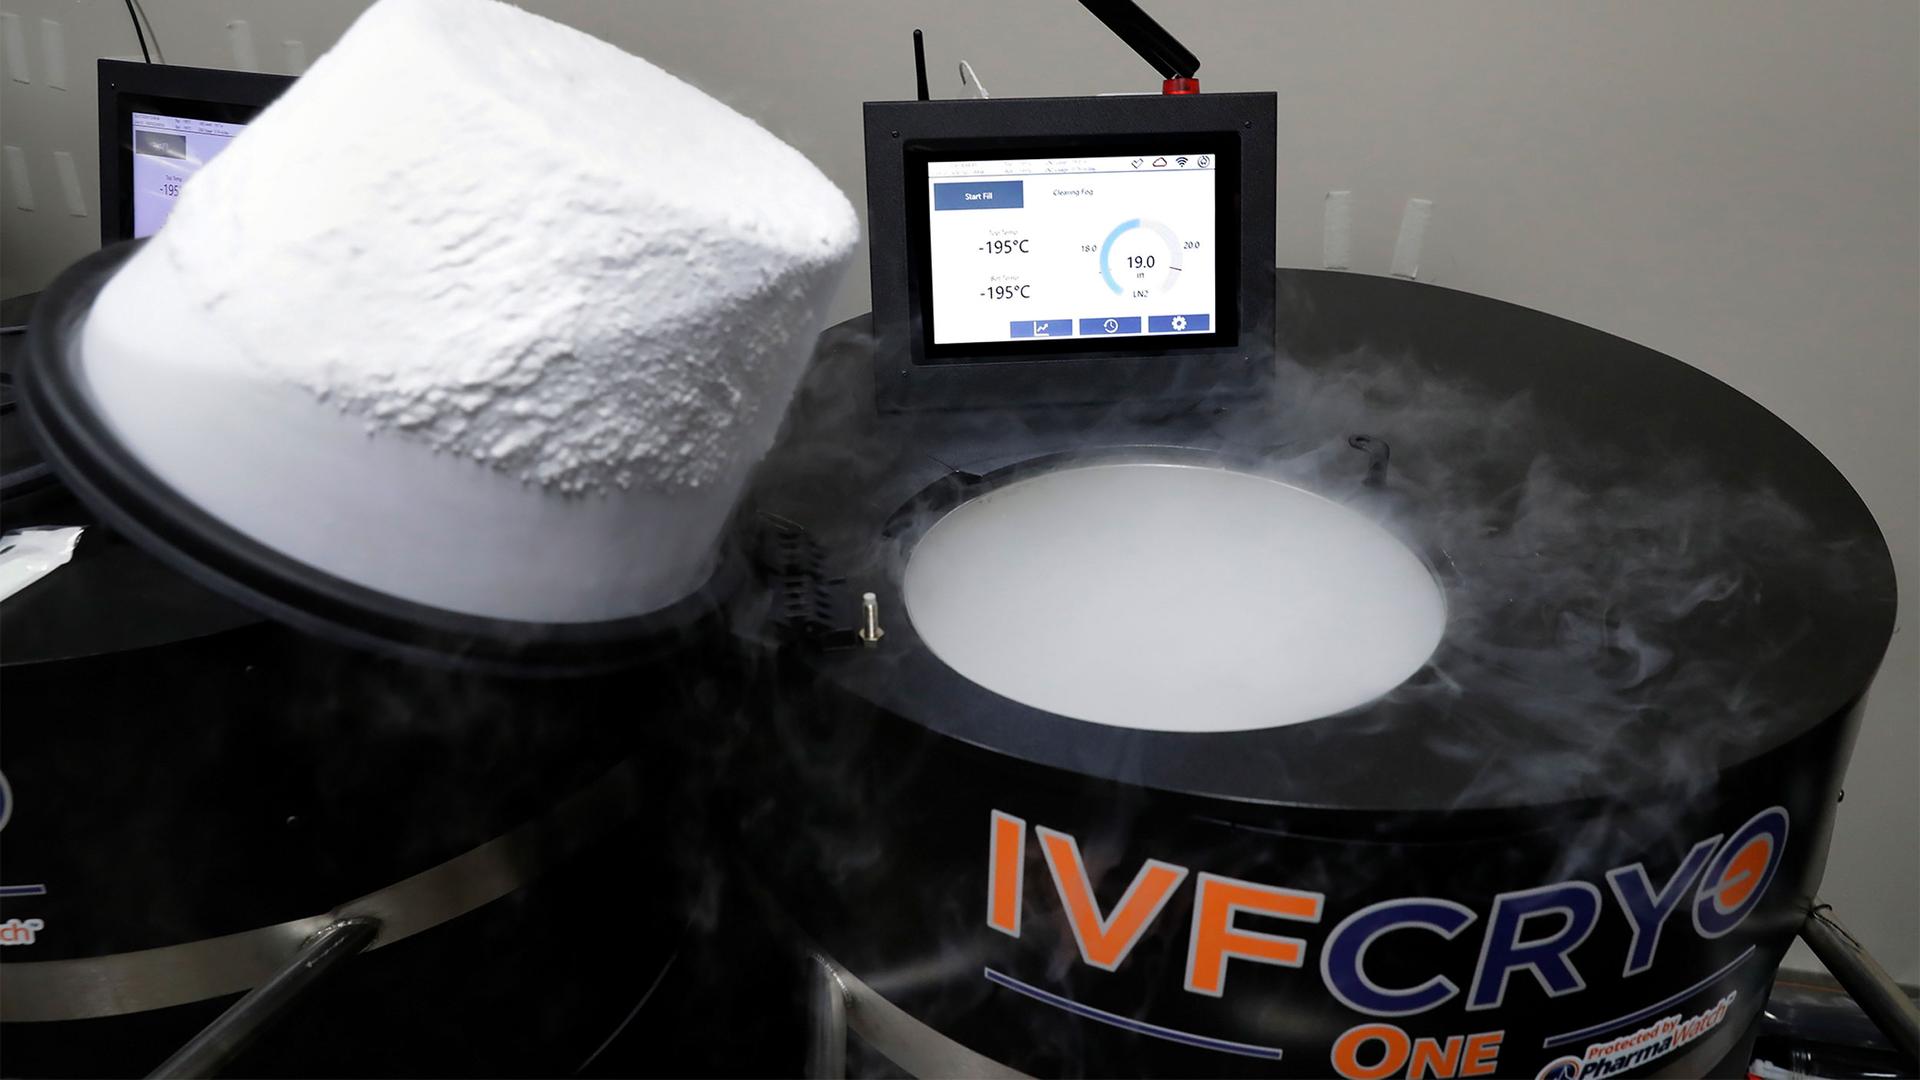 One of large capacity IVFCryo One storage containers that can hold approximately 1,000 egg samples, immersed in liquid nitrogen, at the Aspire Houston Fertility Institute in vitro fertilization lab in Houston, Feb. 27, 2024.